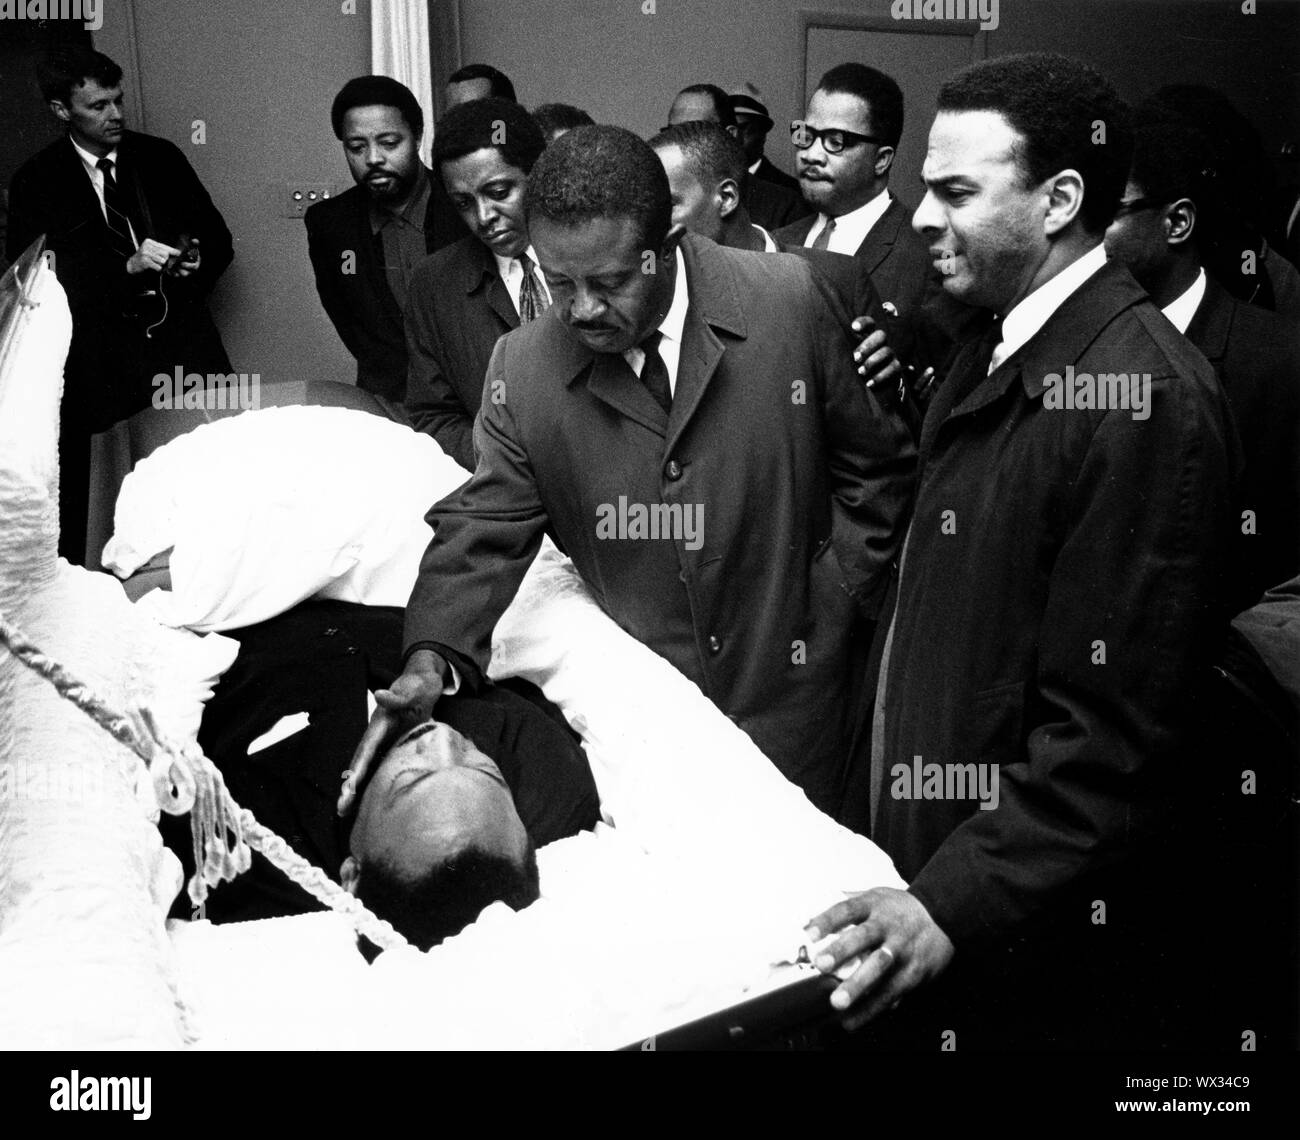 April 9, 1968 - Atlanta, Georgia, U.S. - Mourners, including ANDREW YOUNG, right, looks on as REV. RALPH ABERNATHY gently touches Dr. King's face as they gather around the casket and body of Reverend MARTIN LUTHER KING, JR, to pay their respects and say good bye at his funeral service. (Credit Image: © Keystone Press Agency/Keystone USA via ZUMAPRESS.com) Stock Photo